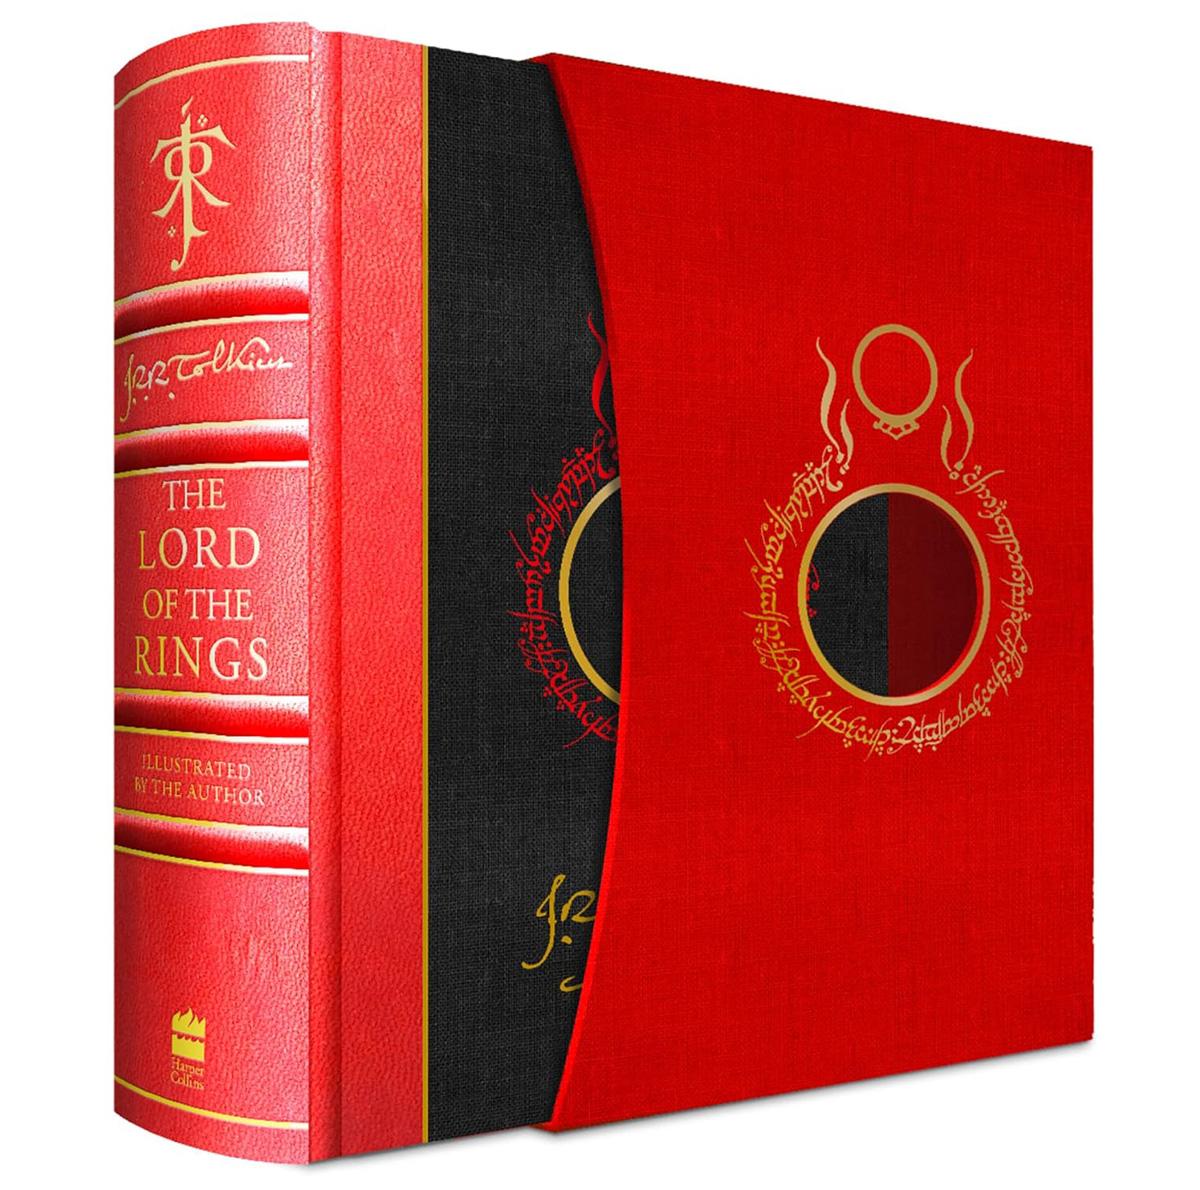 The Lord of the Rings Special Edition Hardcover Book for $106.11 Shipped